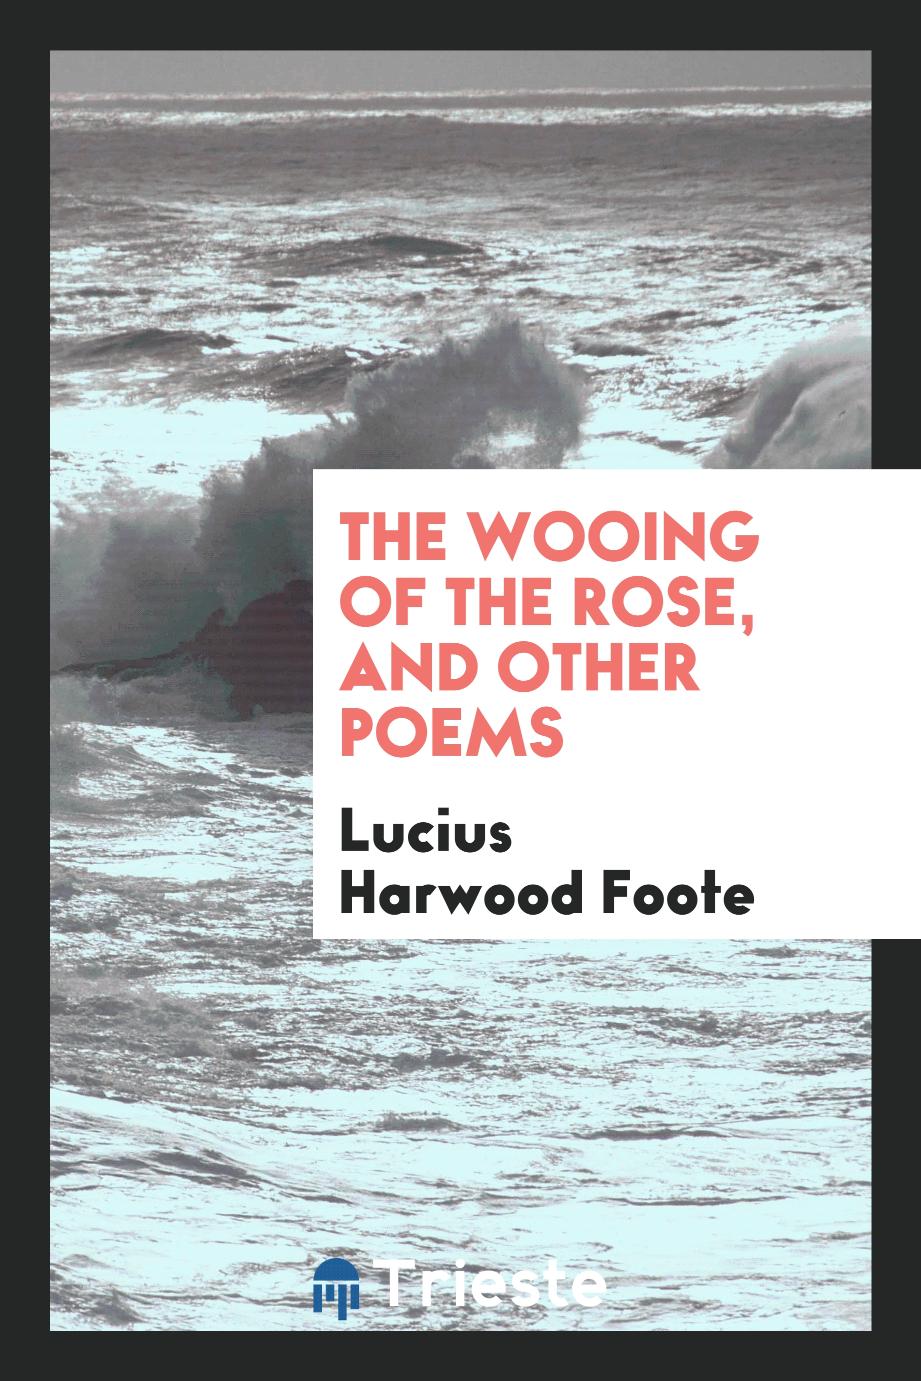 Lucius Harwood Foote - The wooing of the rose, and other poems